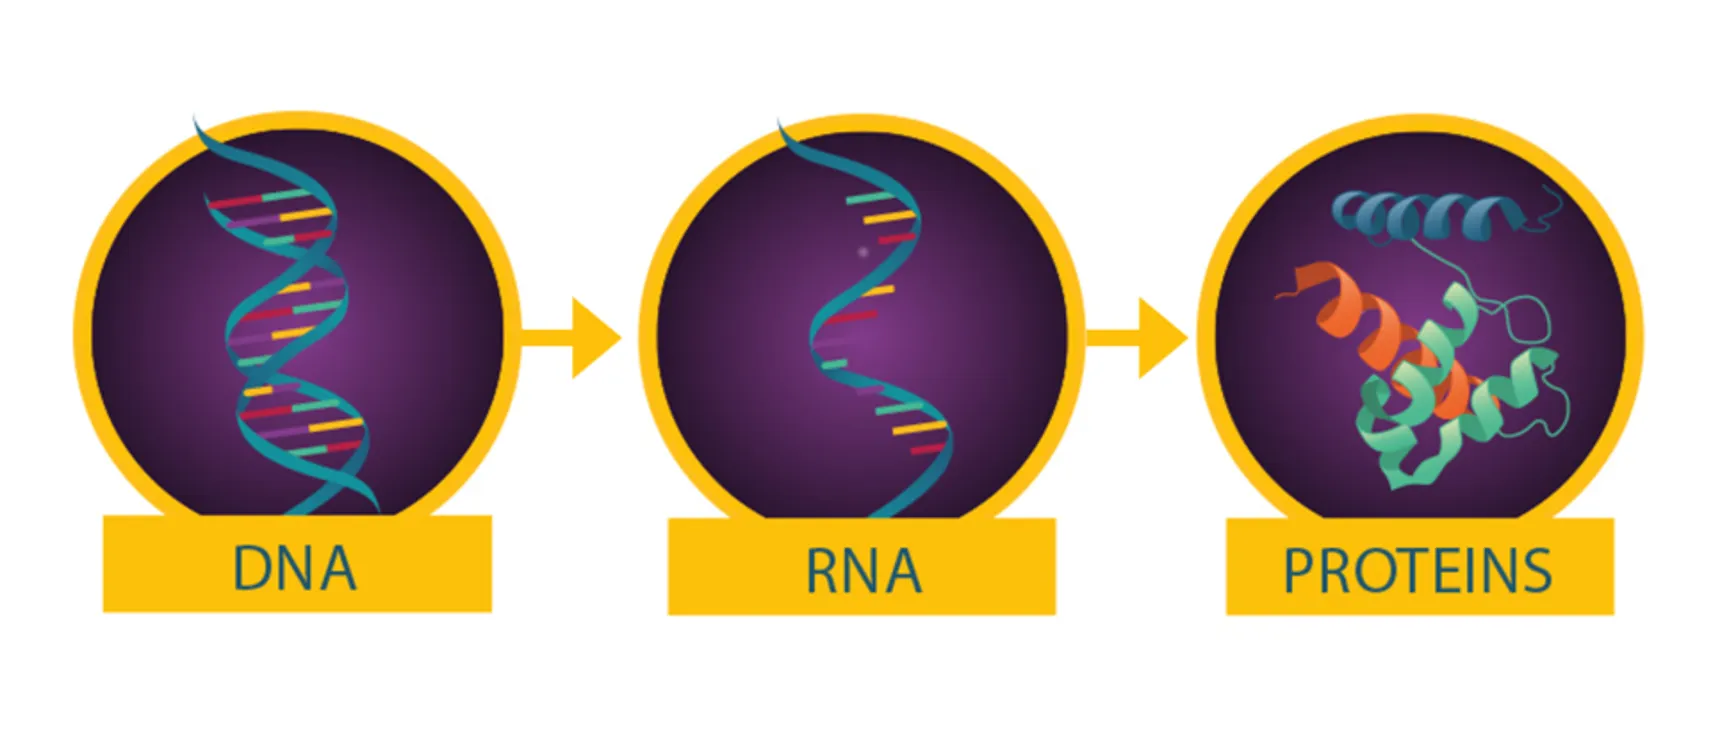 Genes in DNA that are expressed become RNA which become proteins